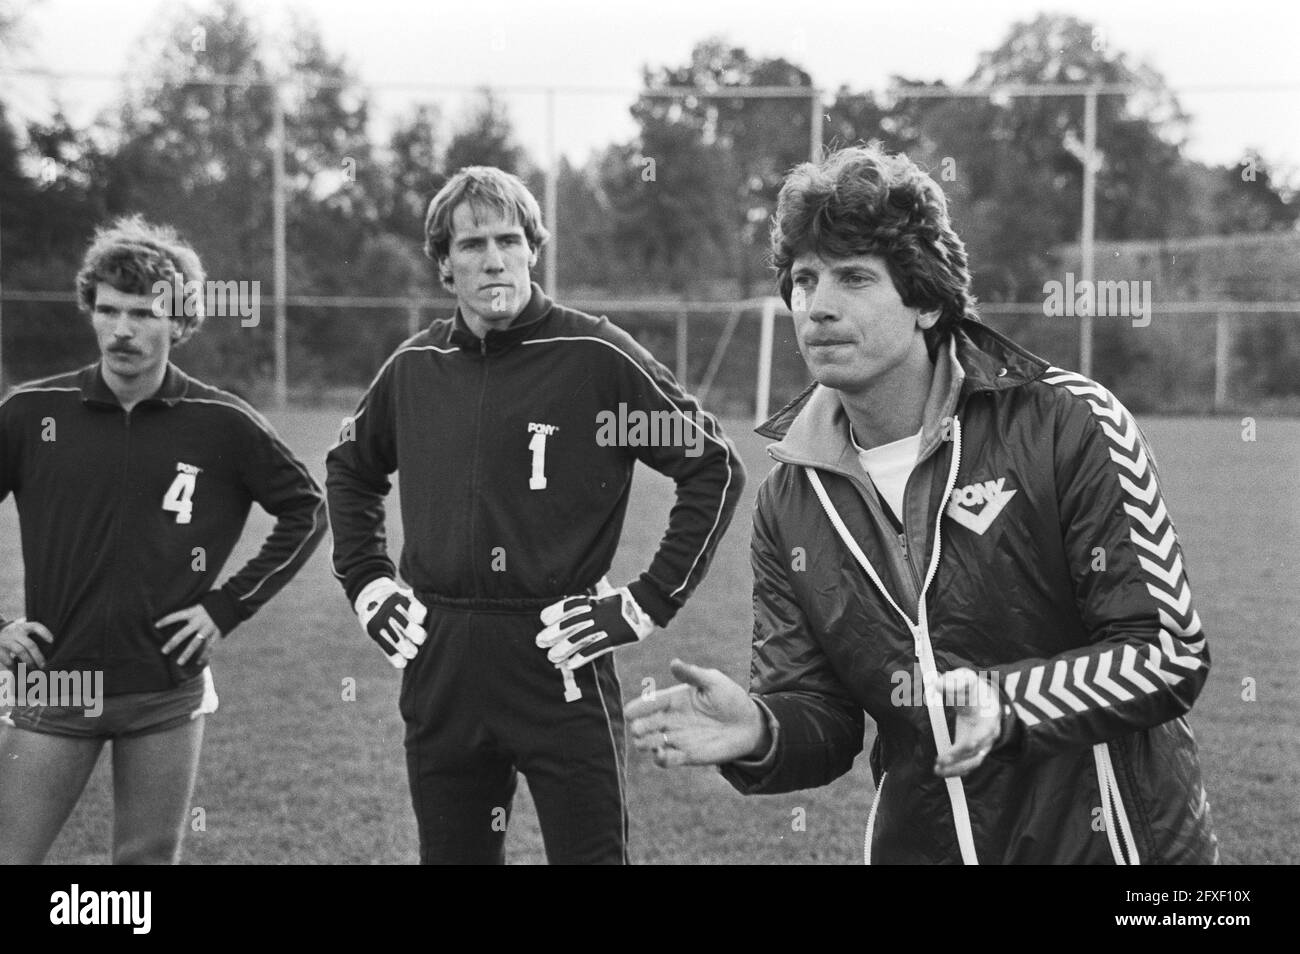 Training FC Utrecht for Wednesday match against Eintracht Frankfurt, 16a and 17a trainer Utrecht Berger with goalkeeper Van Breukelen ,  20 October 1980, goalkeepers, sports, teams, trainers, soccer, matches, The Netherlands, 20th century press agency photo, news to remember, documentary, historic photography 1945-1990, visual stories, human history of the Twentieth Century, capturing moments in time Stock Photo